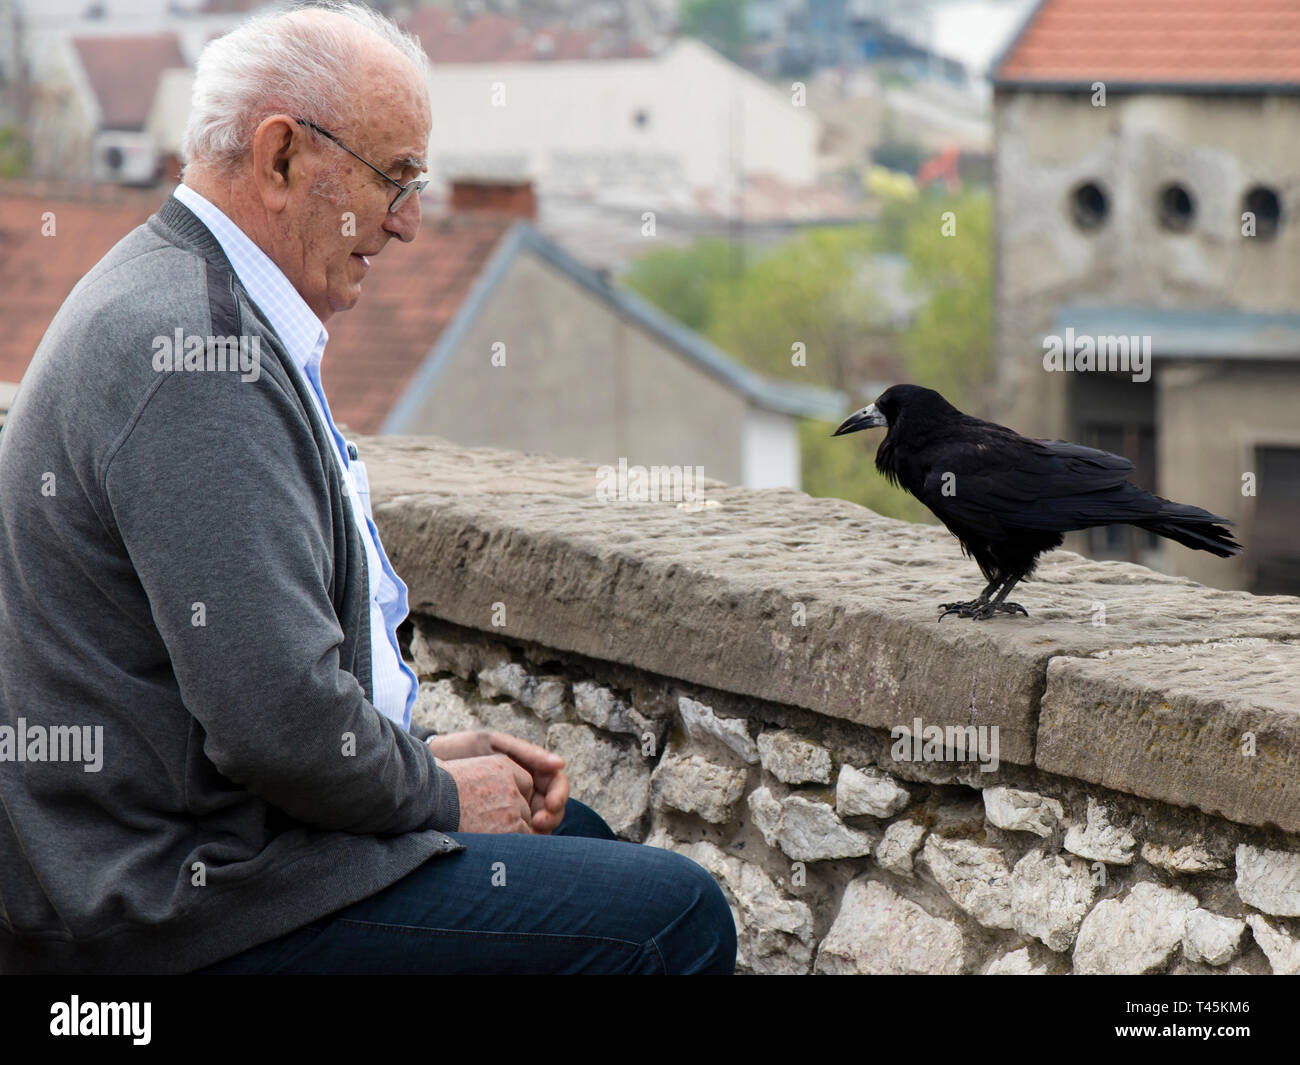 Belgrade, Serbia -  April 9, 2019: Lonely senior man sitting alone on a city bench and looking at crow or raven bird looking back Stock Photo